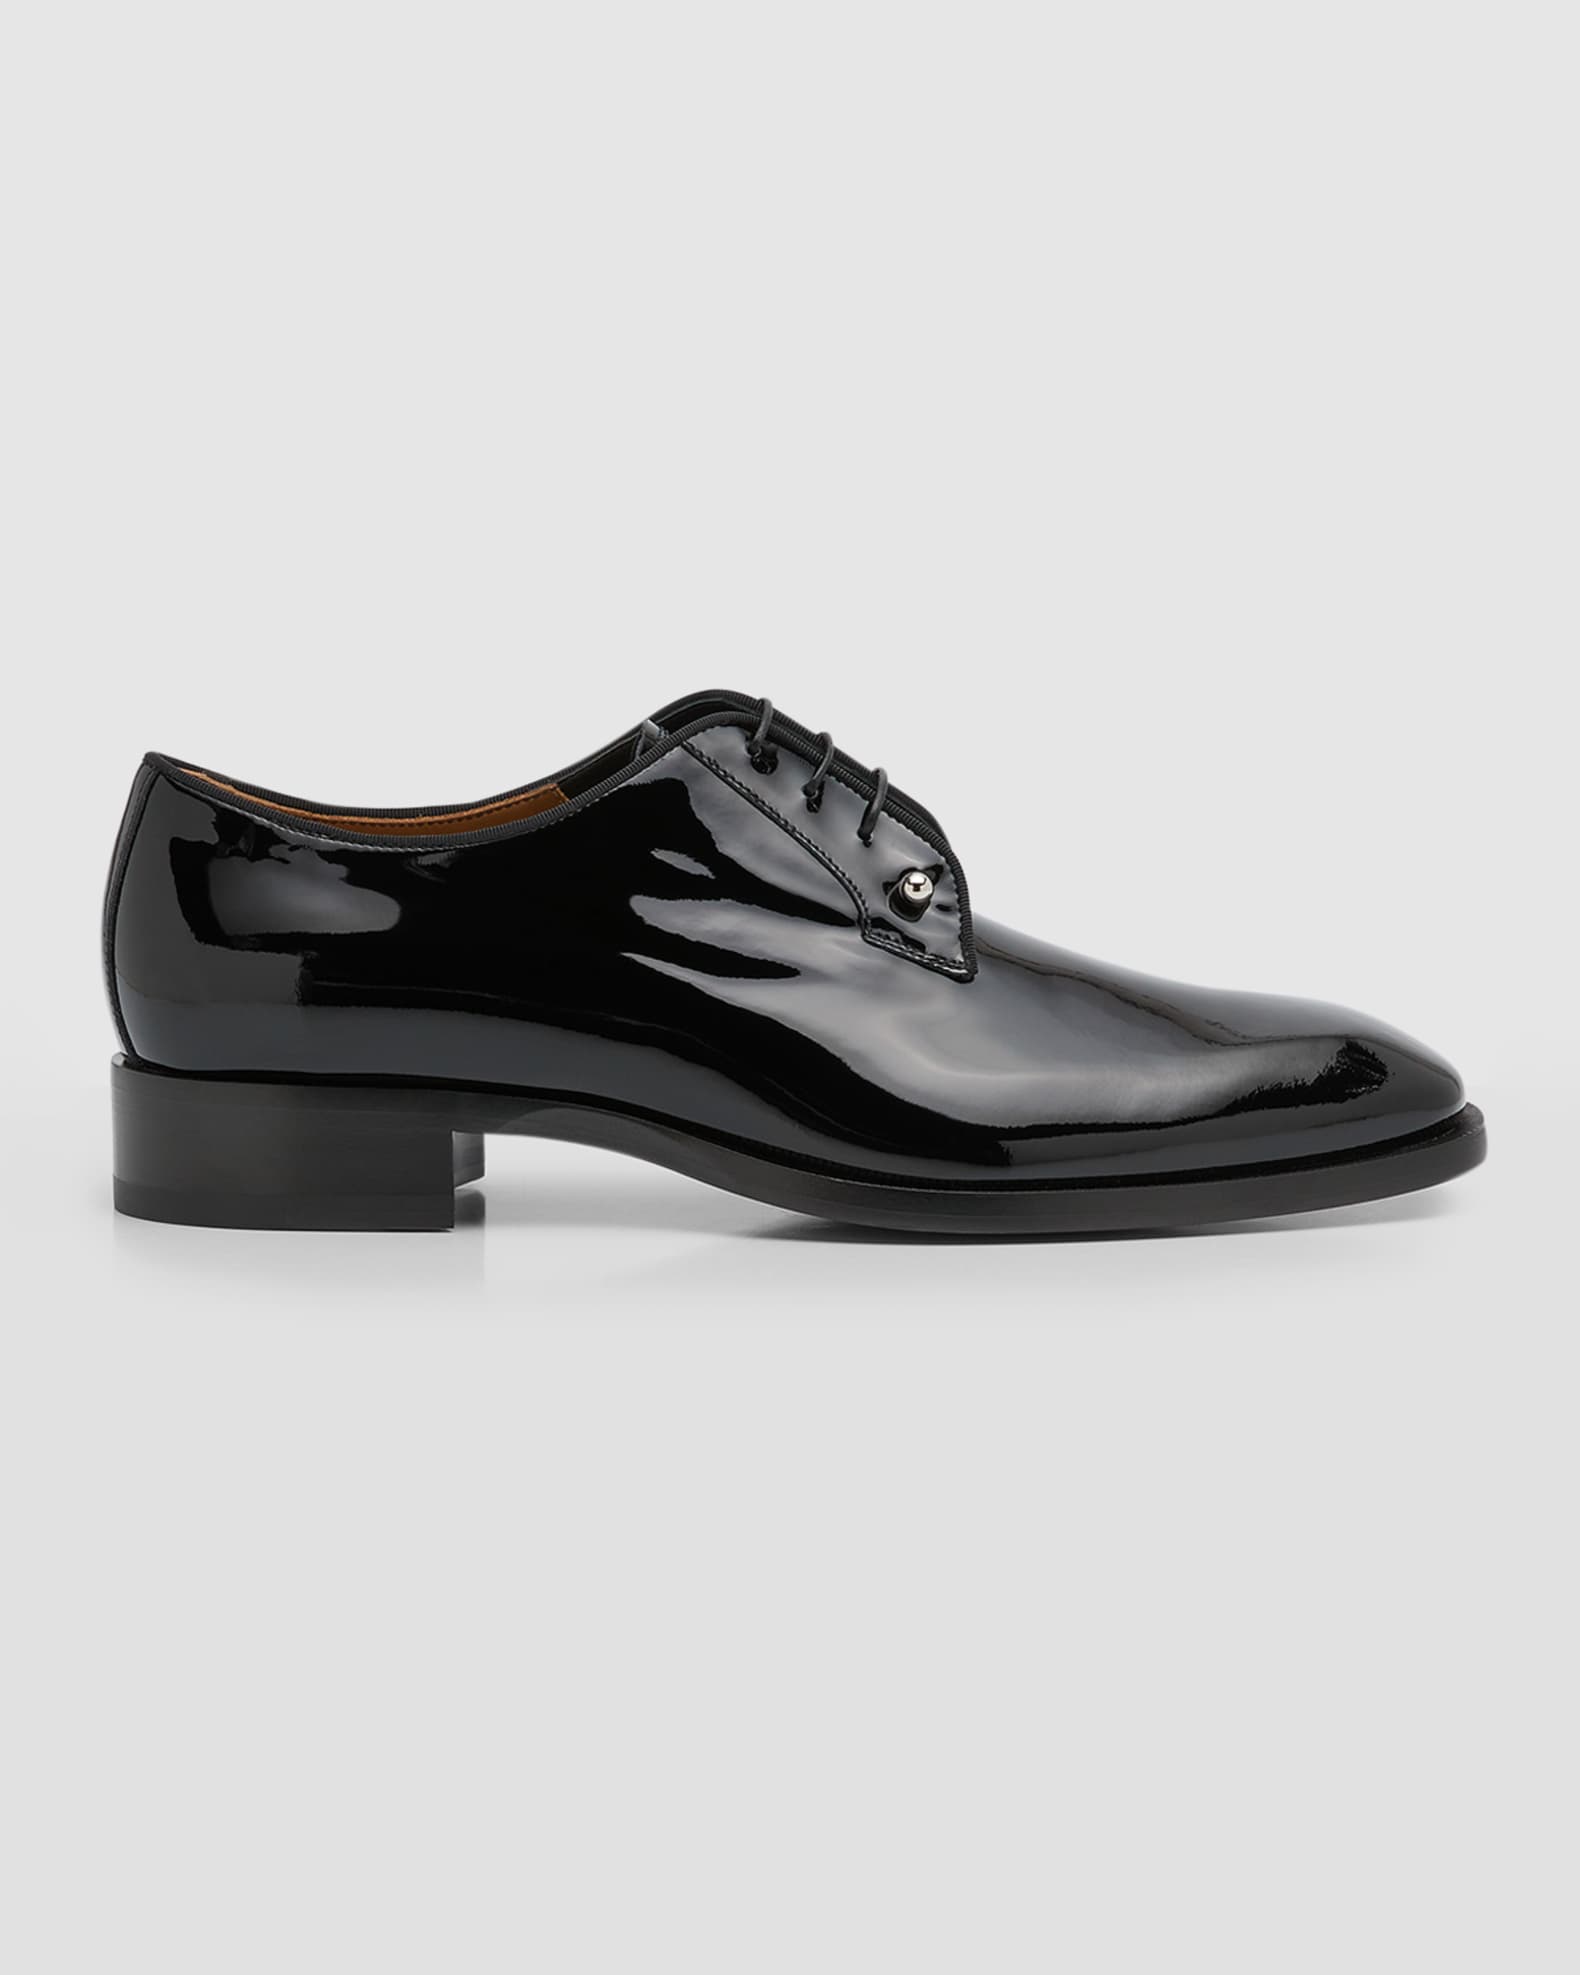 Christian Louboutin Men's Chambeliss Patent Leather Derby Shoes ...